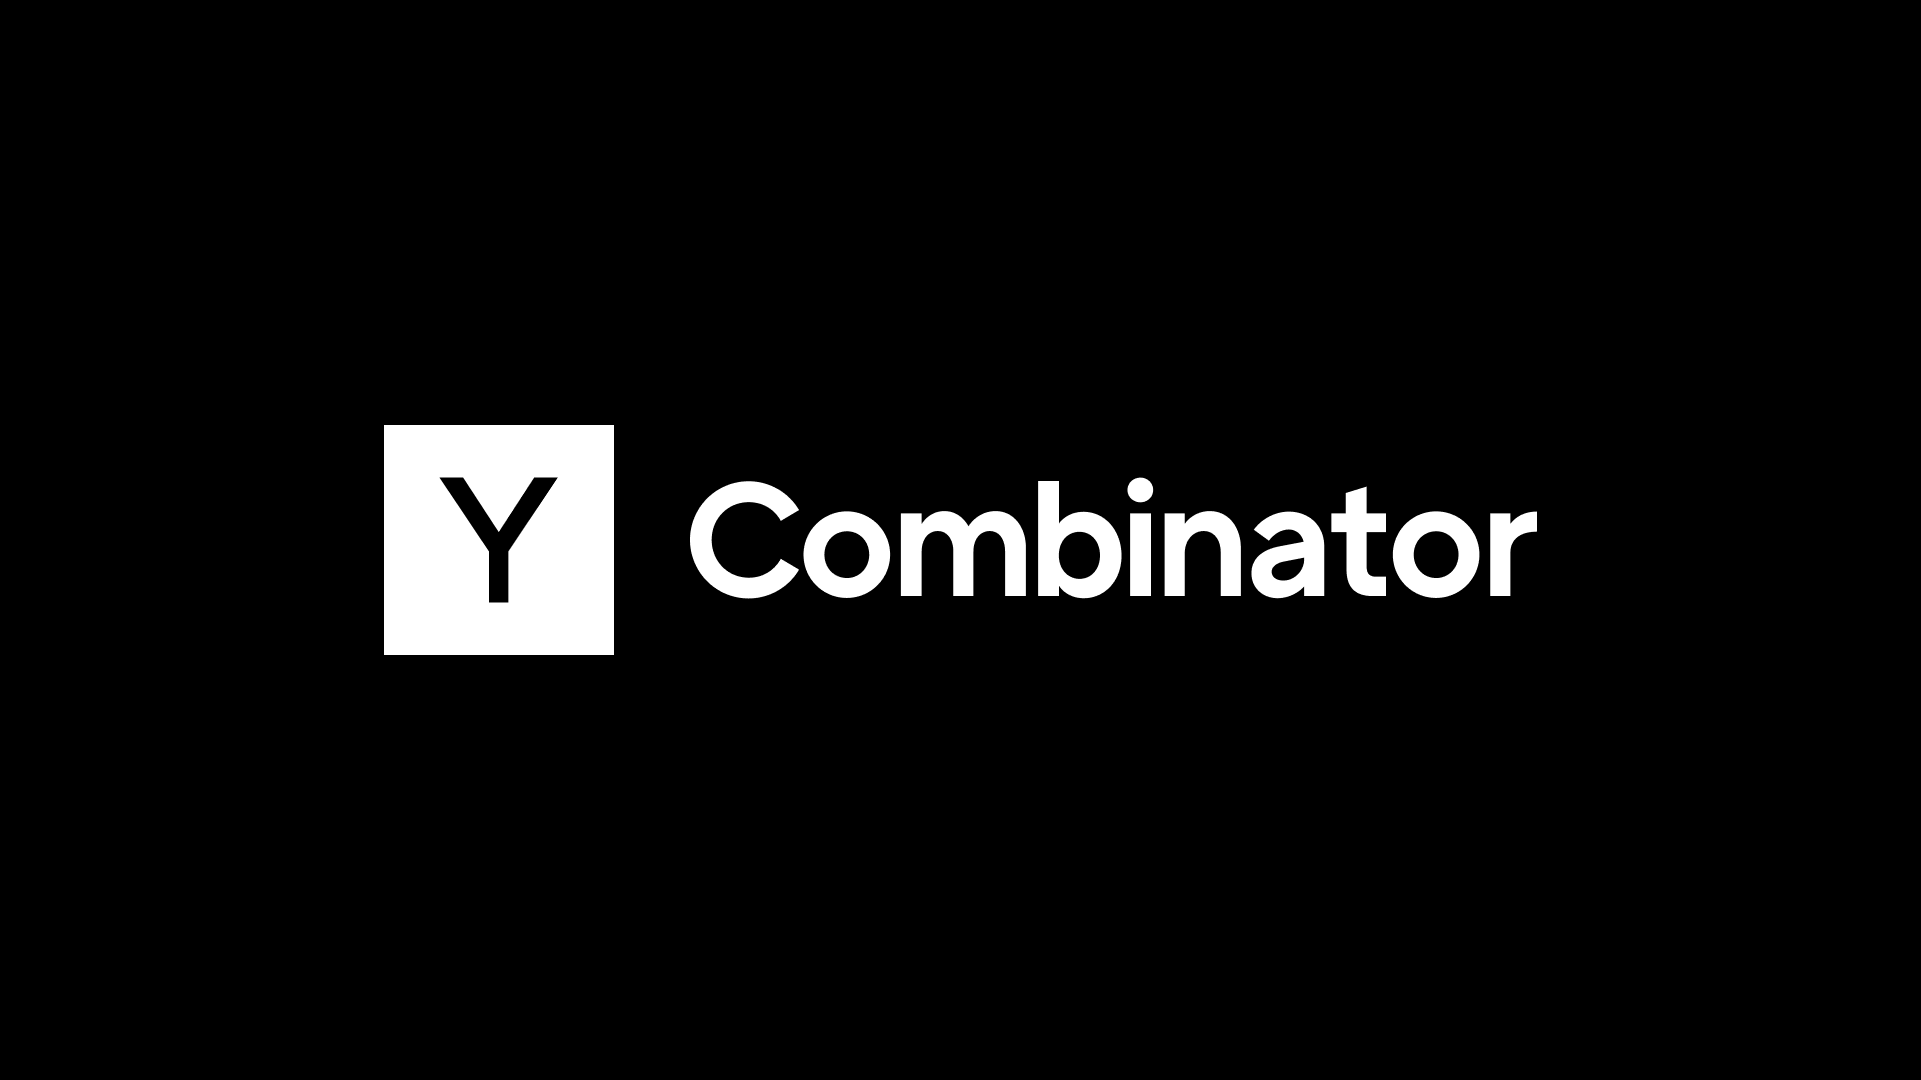 Y Combinator’s Summer 2022 Cybersecurity, Privacy, and Trust Startups